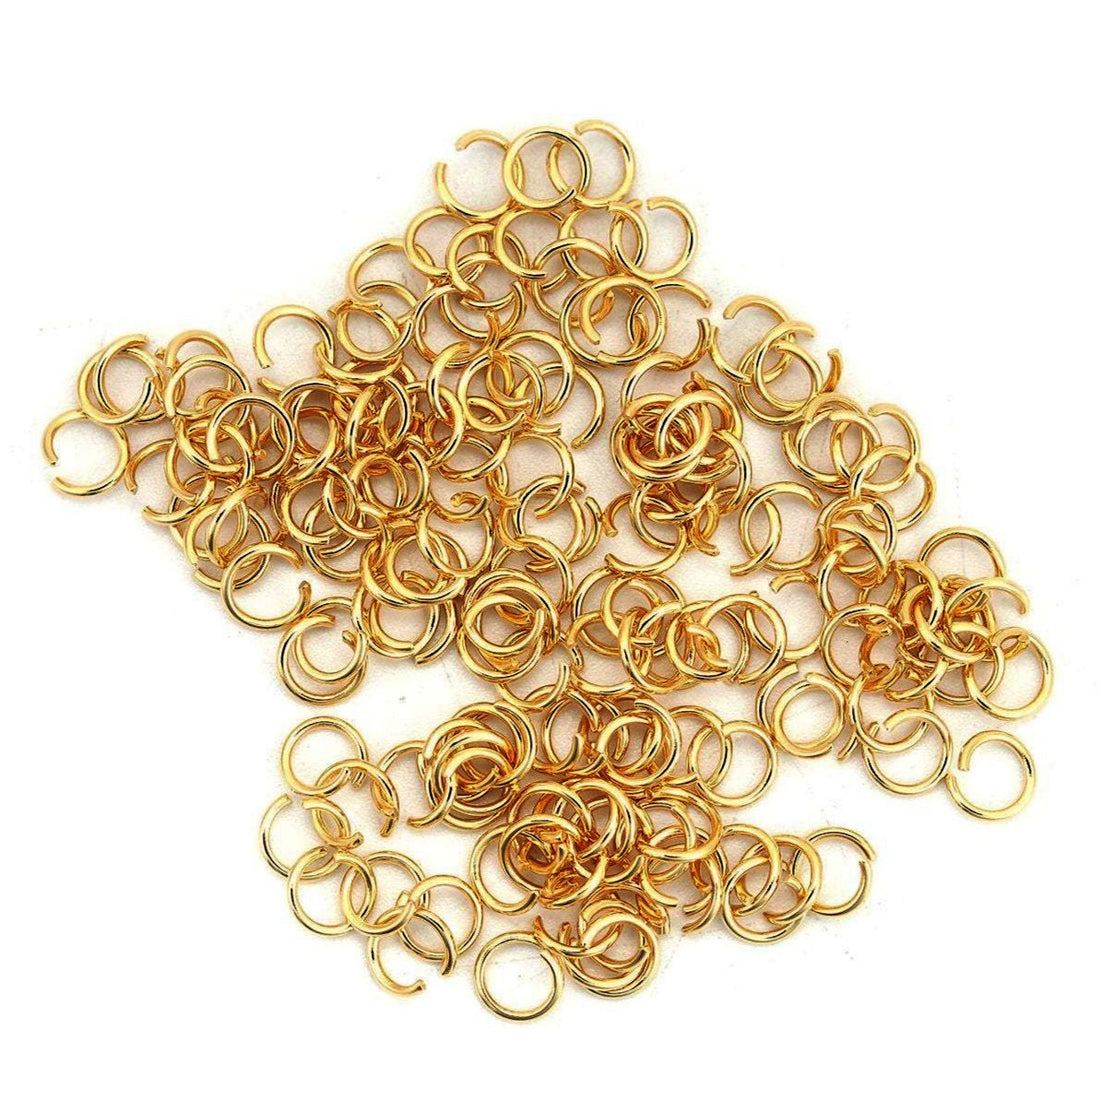 200 Gold stainless steel open jump rings 3mm, 4mm, 5mm, 6mm